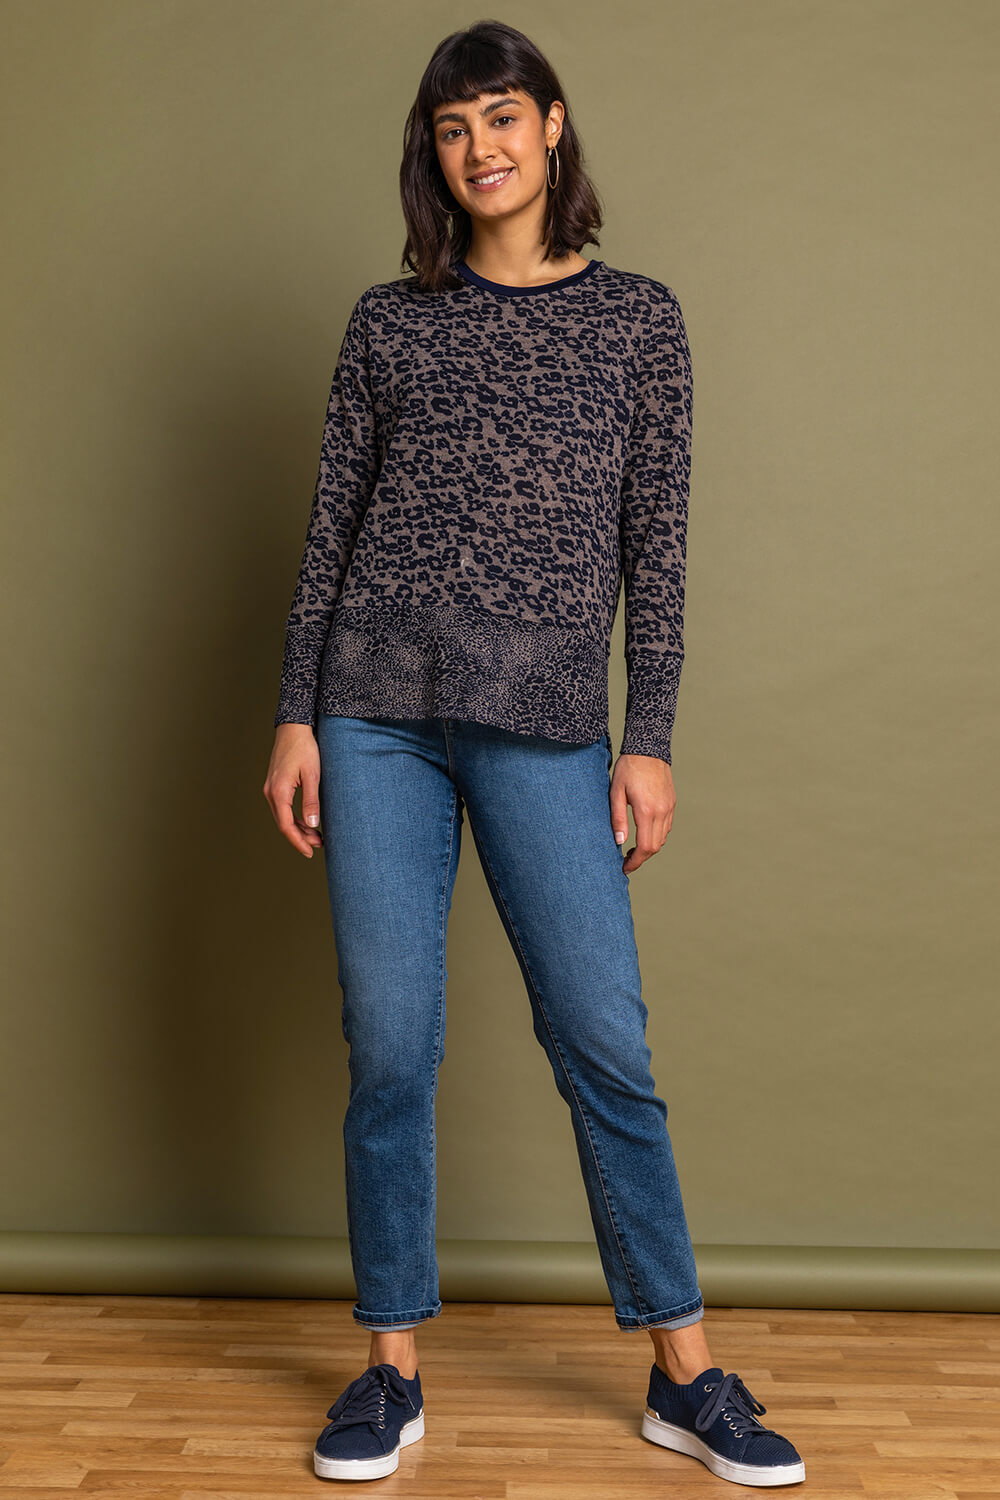 Taupe Leopard Print Round Neck Long Sleeve Jersey Top, Image 4 of 4